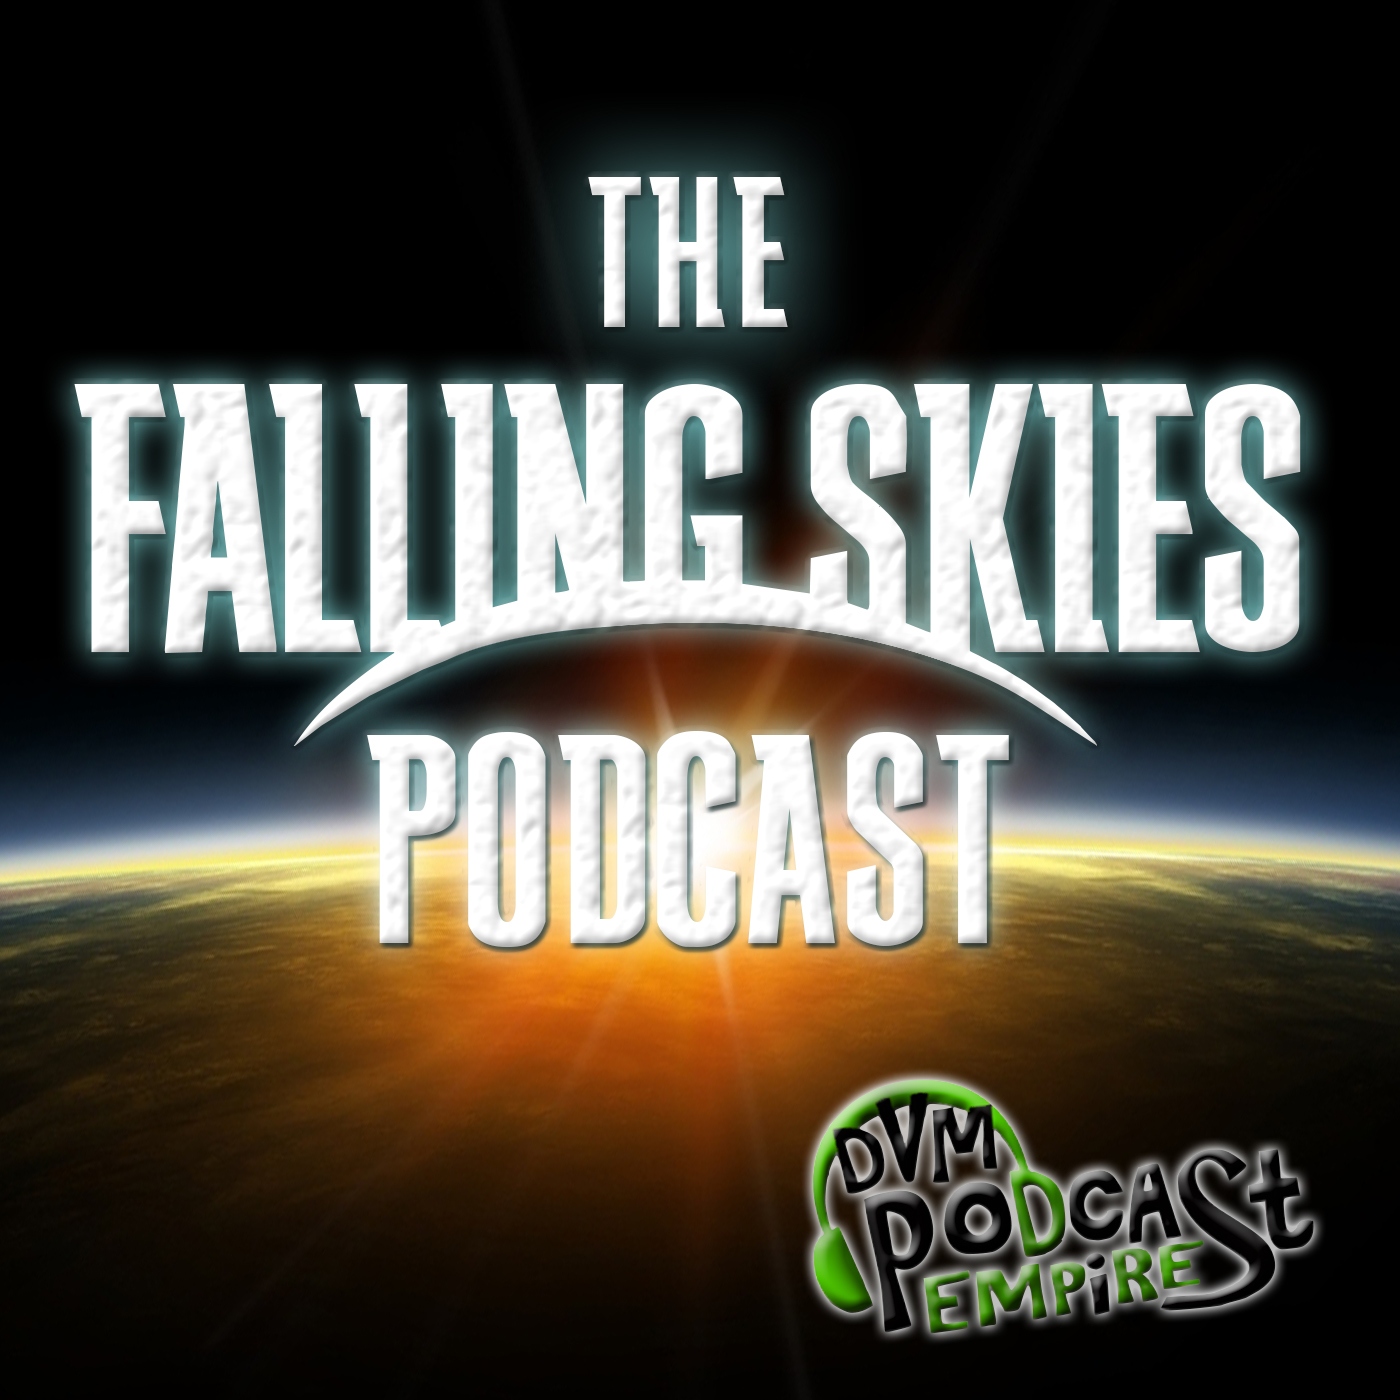 The Falling Skies Podcast